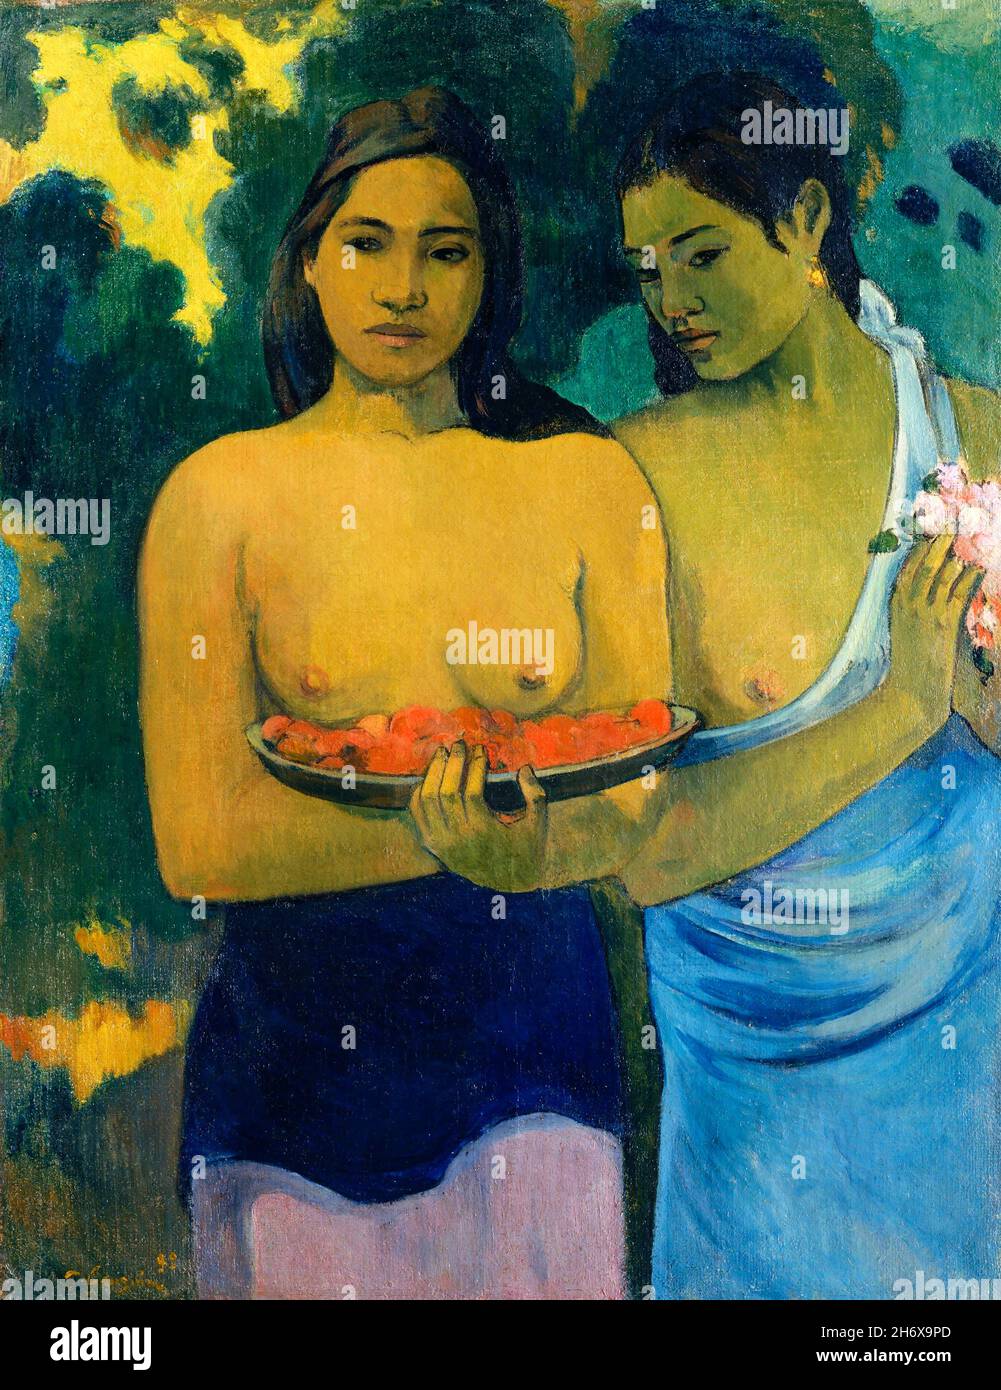 Two Tahitian Women by Paul Gauguin (1848-1903), oil on canvas, 1899 Stock Photo